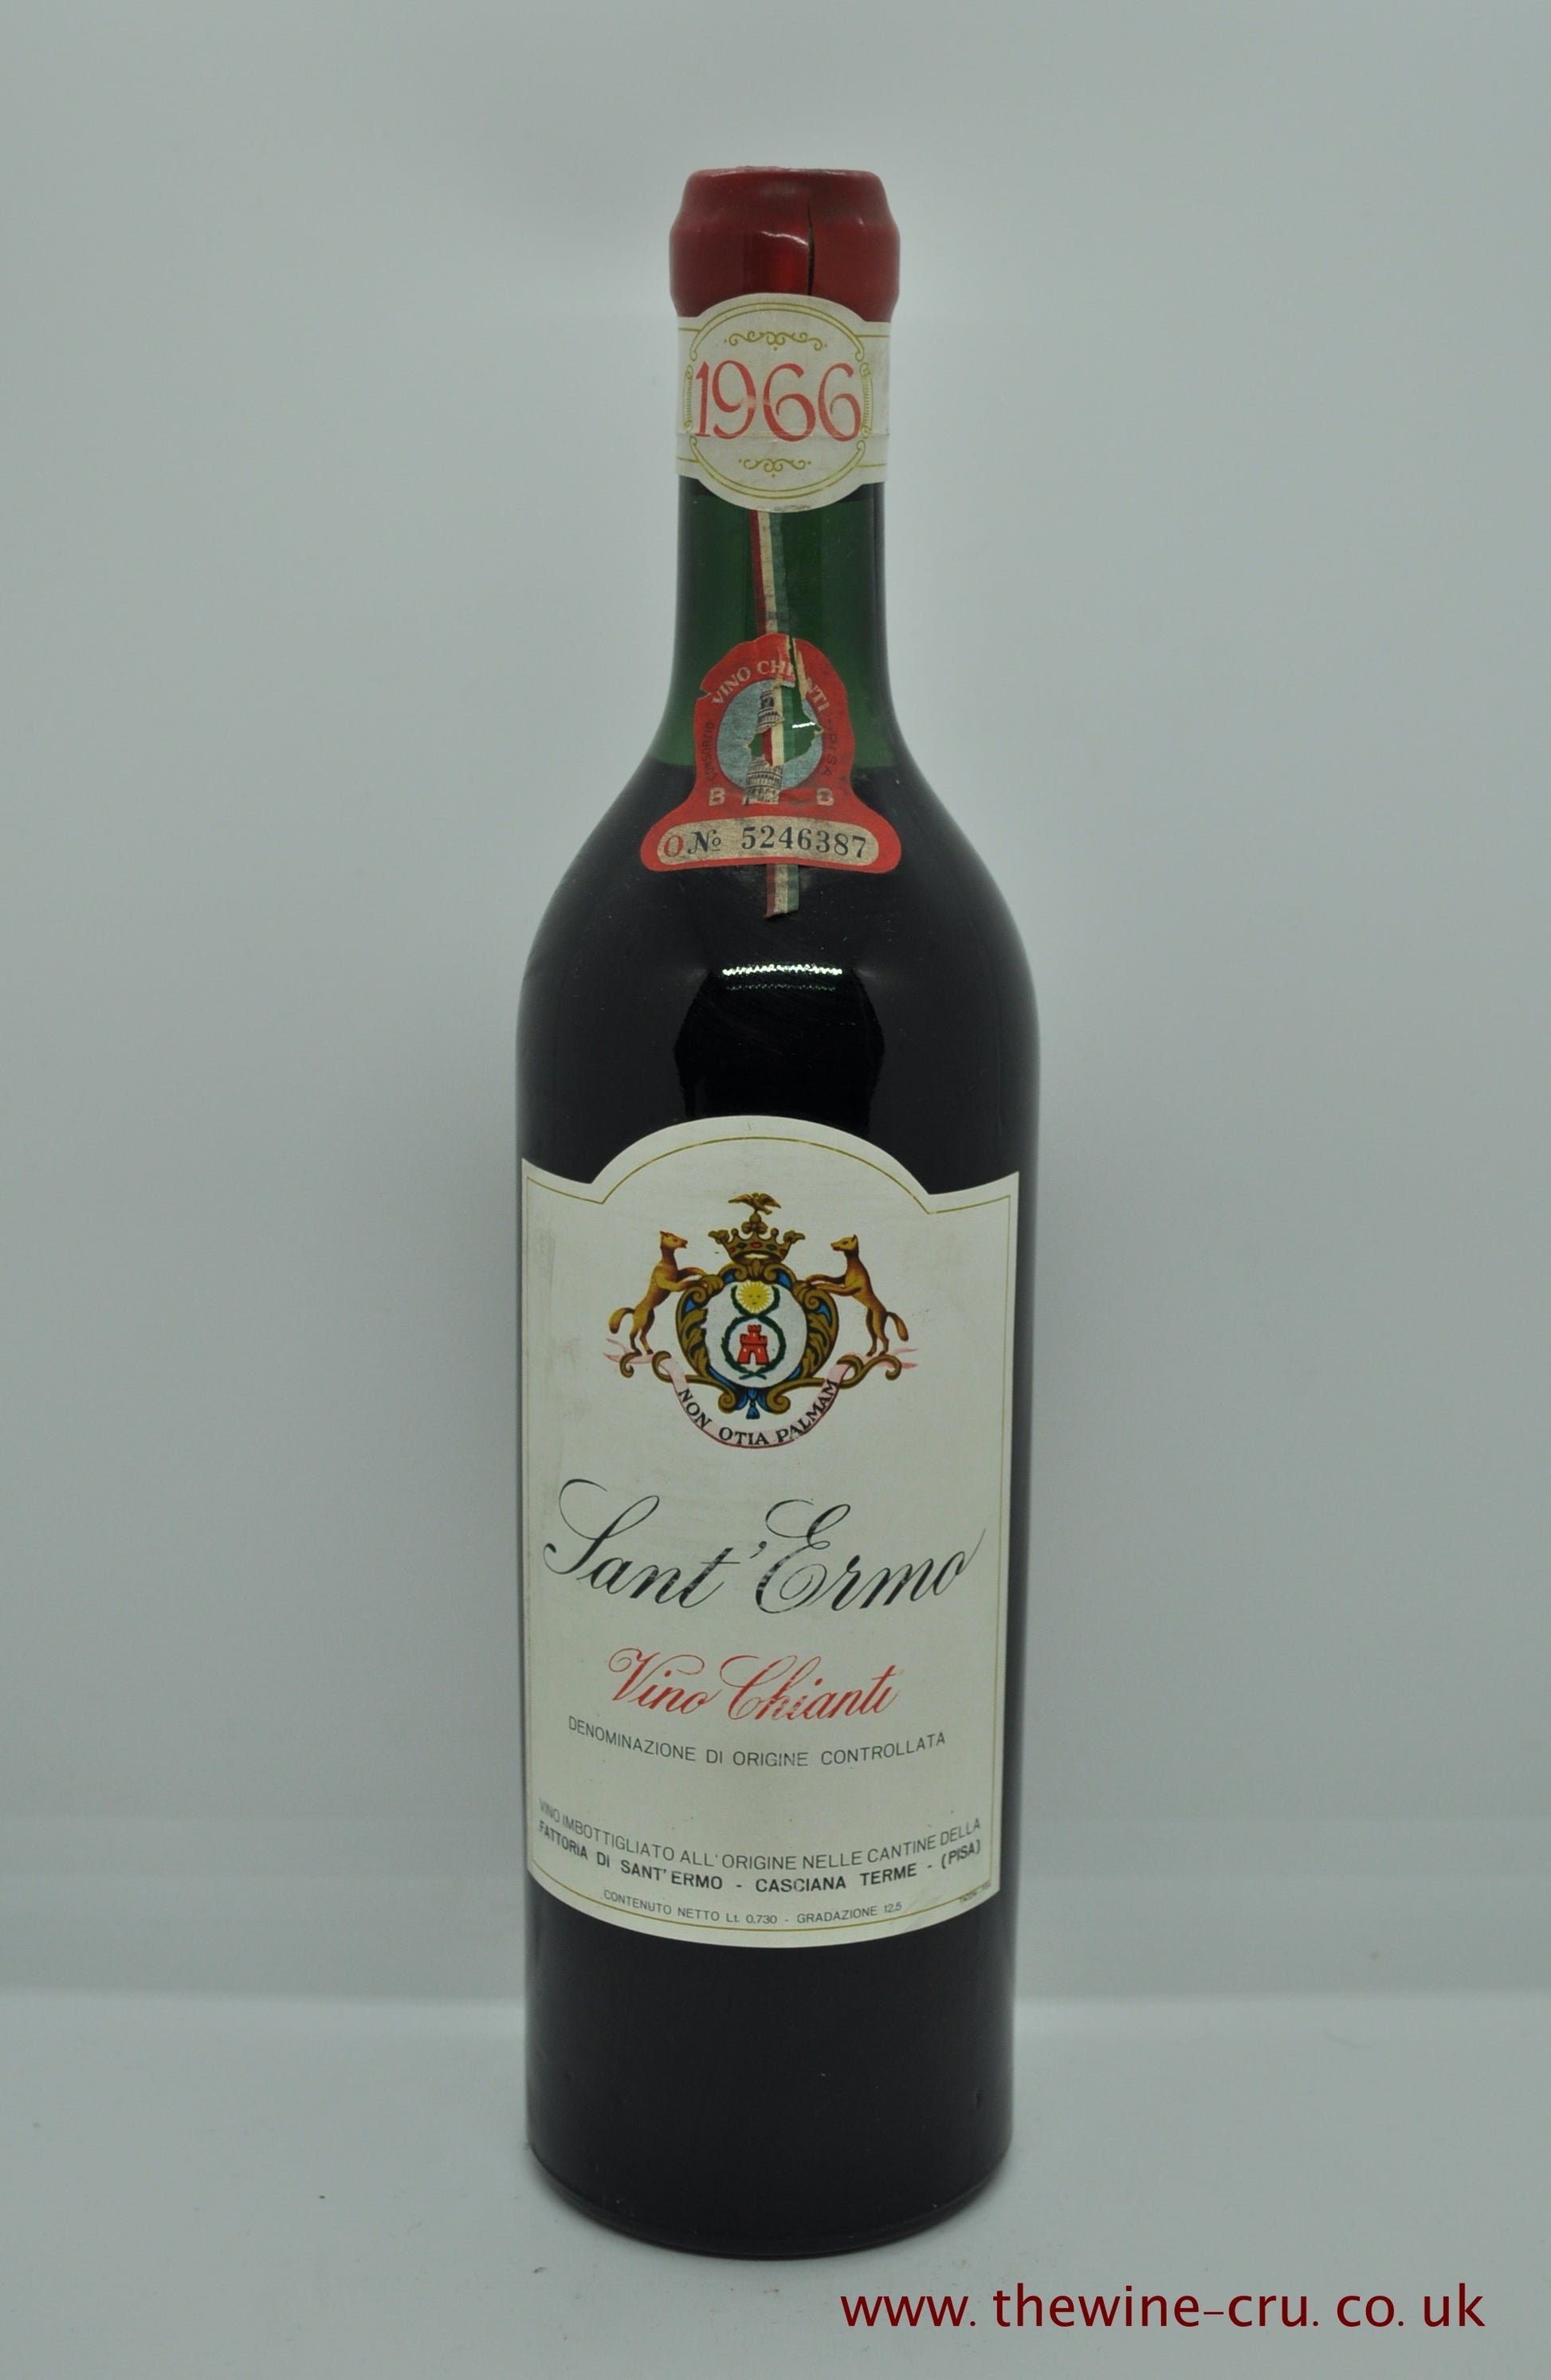 1966 vintage red wine. Sant Ermo Chianti 1966. Italy. Immediate delivery. Free local delivery. Gift wrapping available.